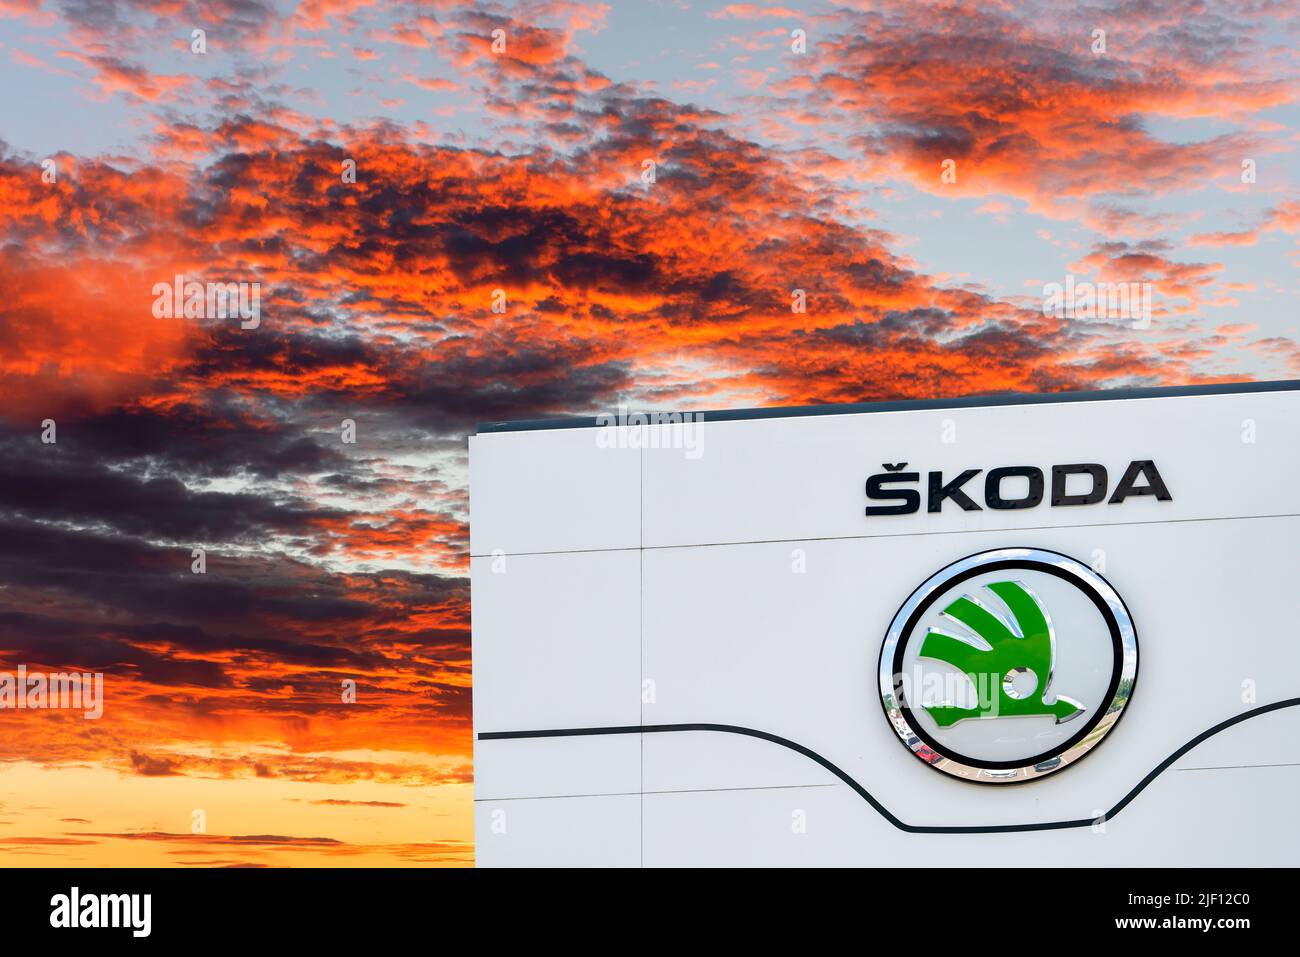 AUGSBURG, GERMANY – JUNE 16, 2022: Advertising sign of the car brand SKODA in front of a sky with clouds Stock Photo